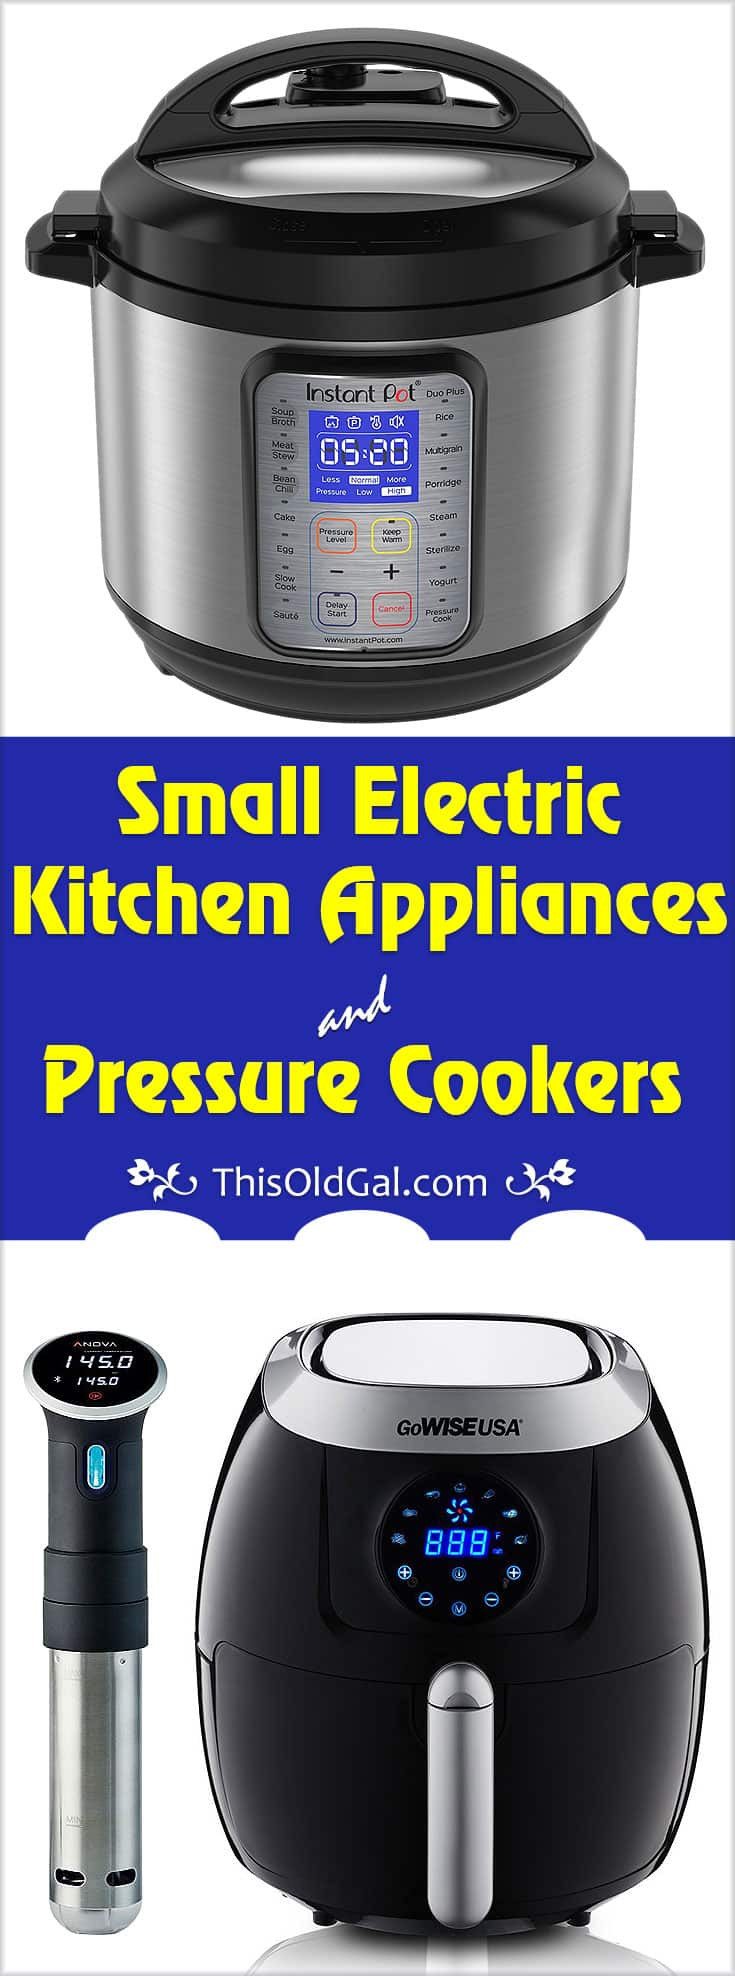 Small Kitchen Refrigerator
 Small Electric Kitchen Appliances & Pressure Cookers